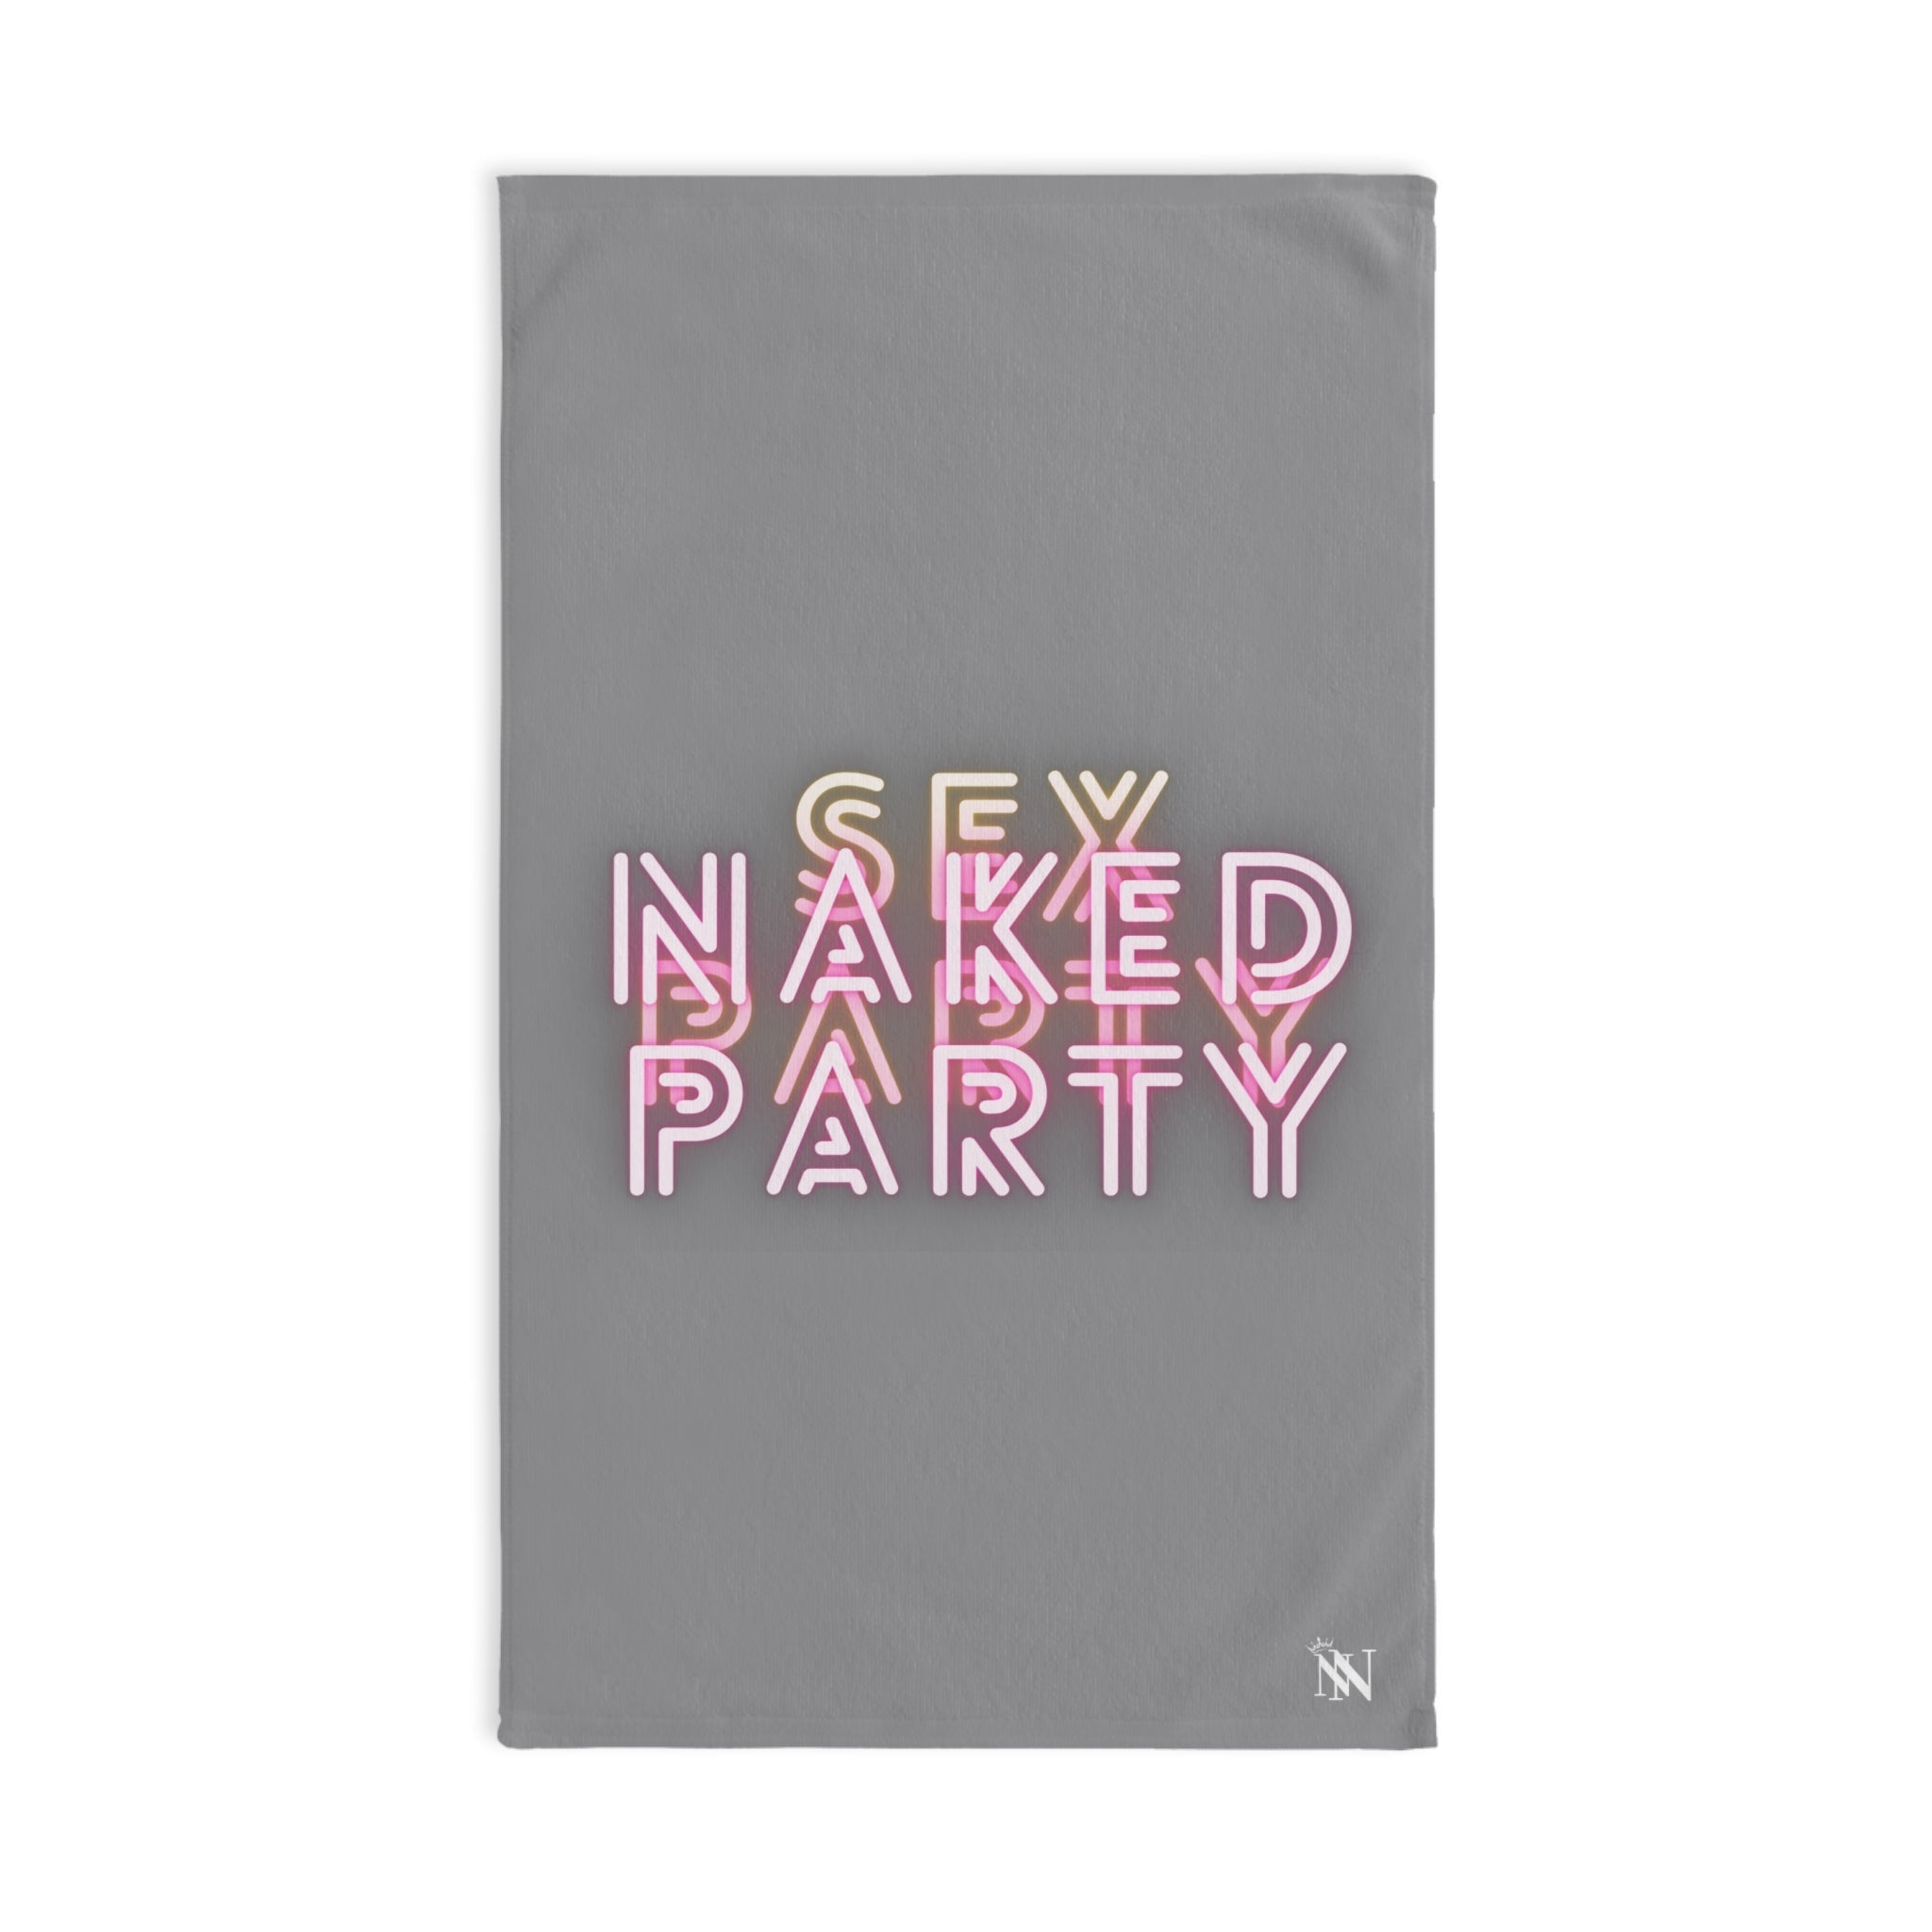 Naked  Party Grey | Anniversary Wedding, Christmas, Valentines Day, Birthday Gifts for Him, Her, Romantic Gifts for Wife, Girlfriend, Couples Gifts for Boyfriend, Husband NECTAR NAPKINS